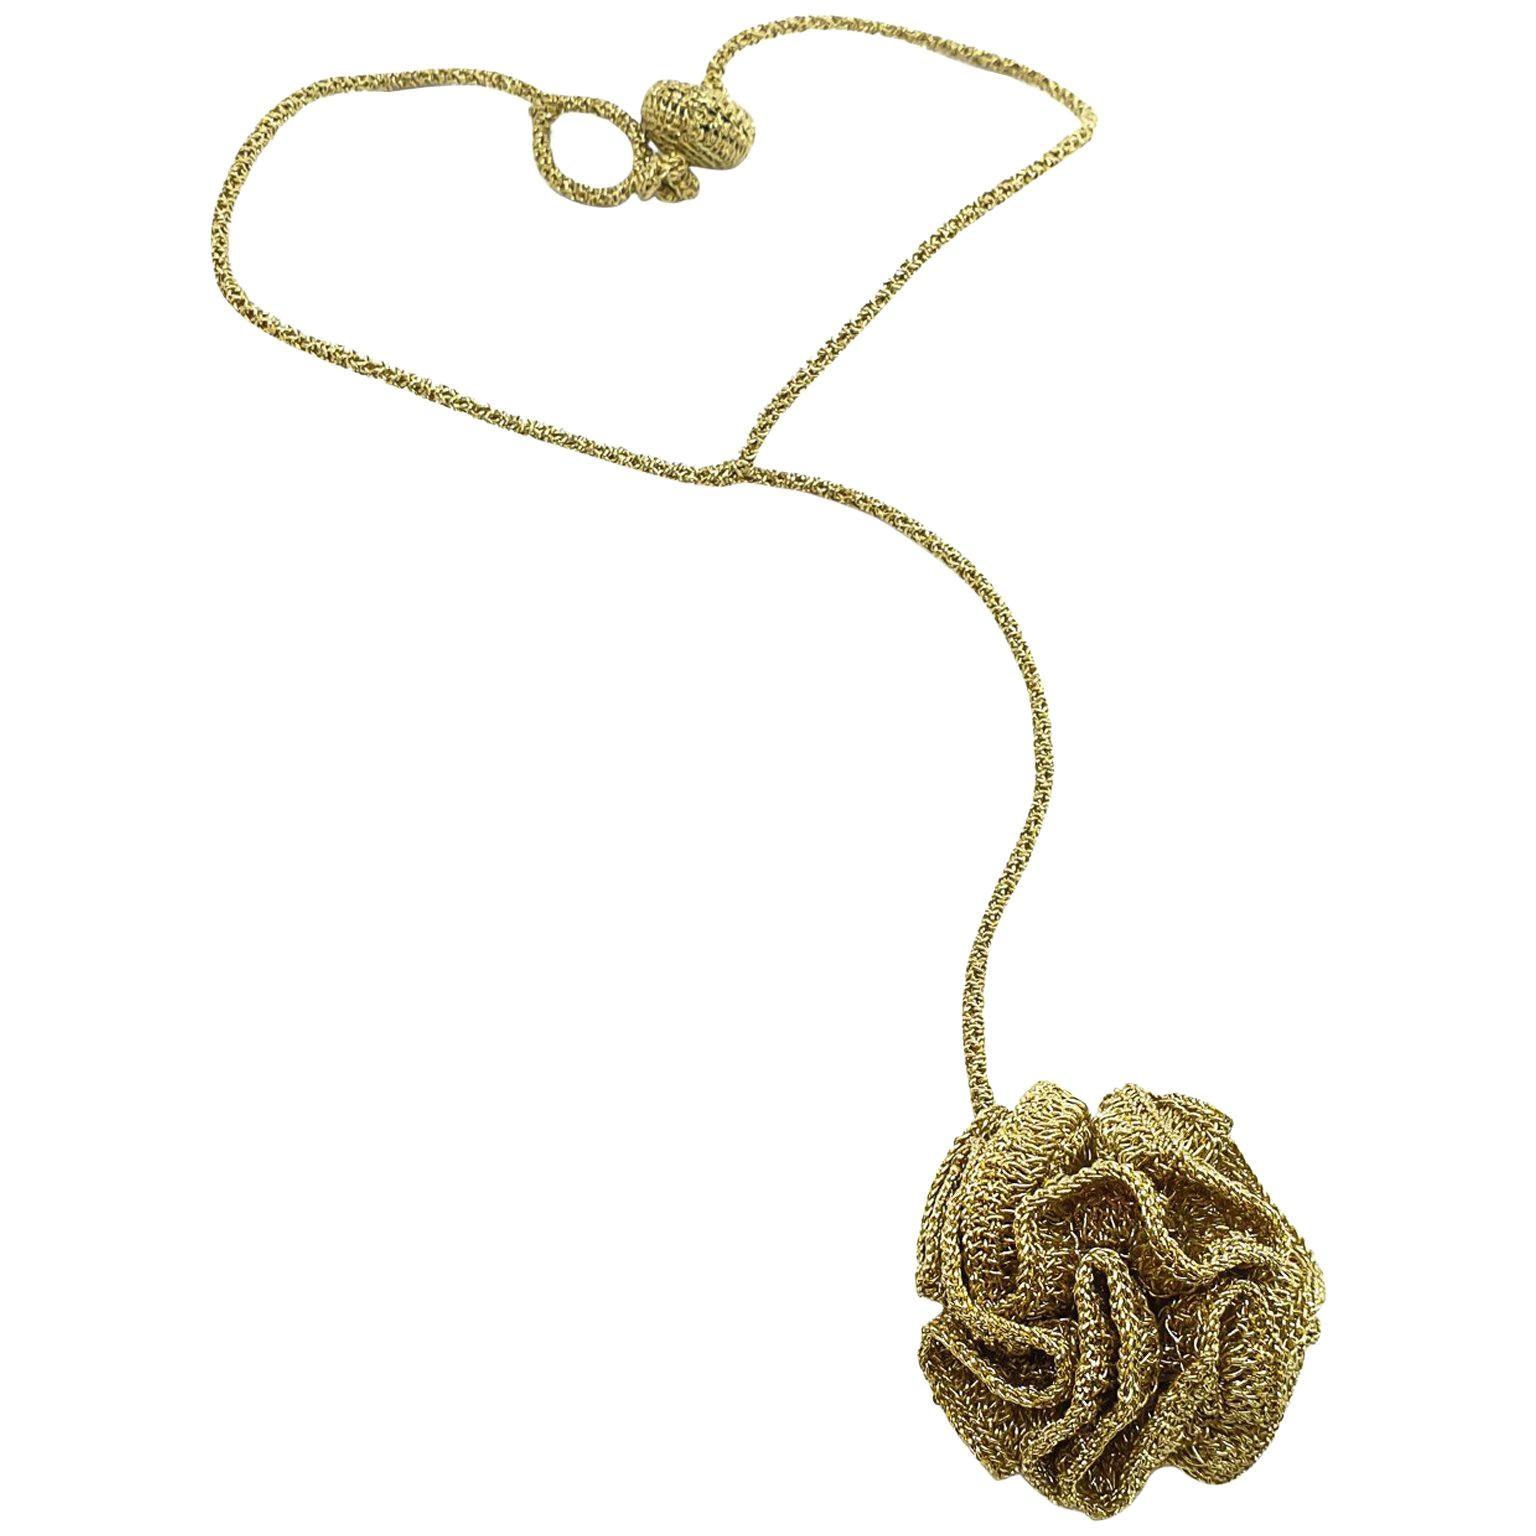 Gold Color Thread Crochet Flower Young Hip Art Contemporary Jewelry Necklace For Sale